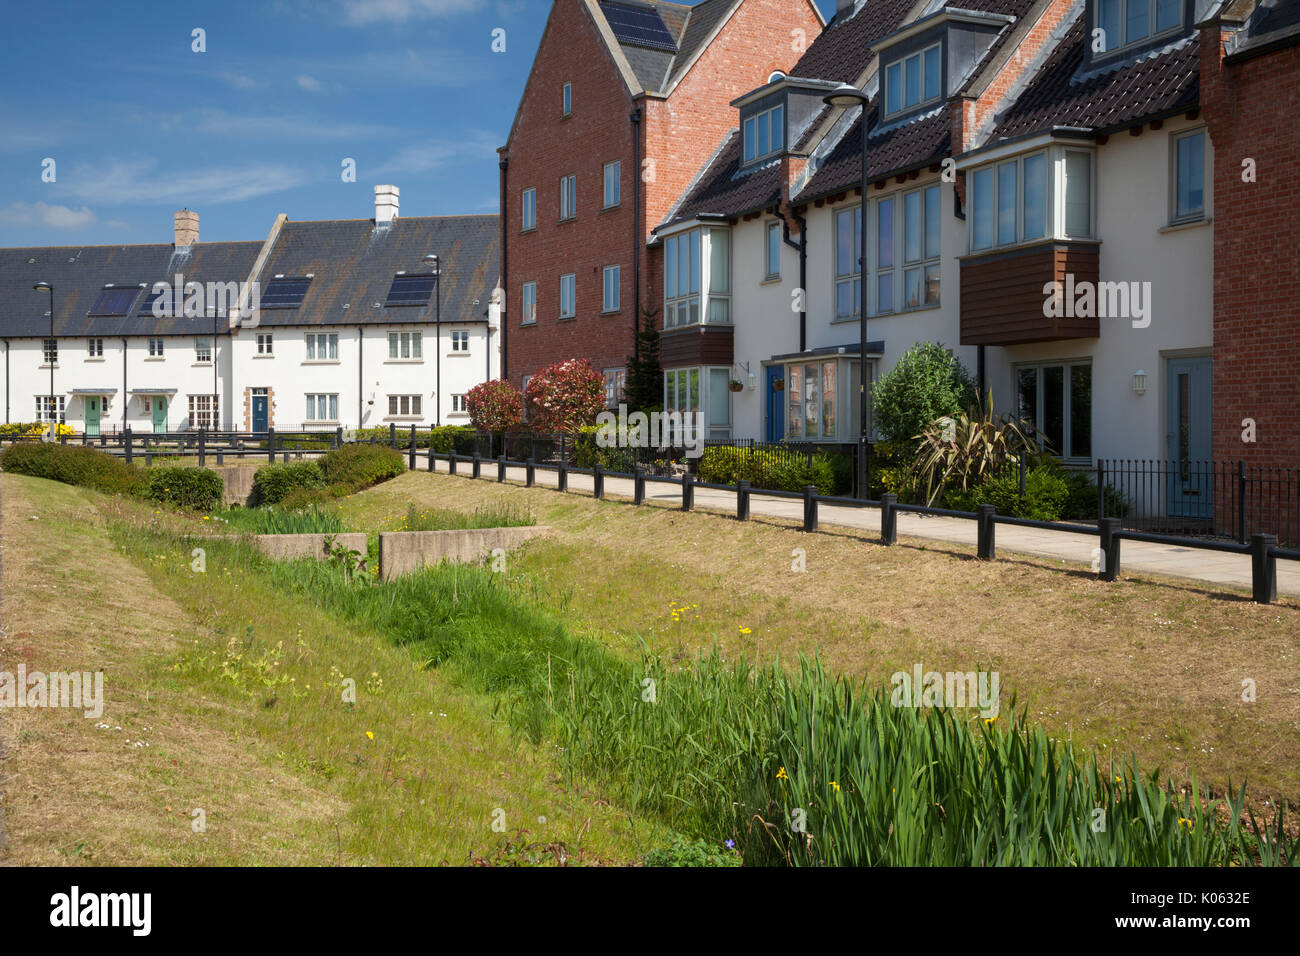 Mixed housing styles to be found within the contemporary suburban development with a sustainable drainage system, Upton in Northampton, England. Stock Photo